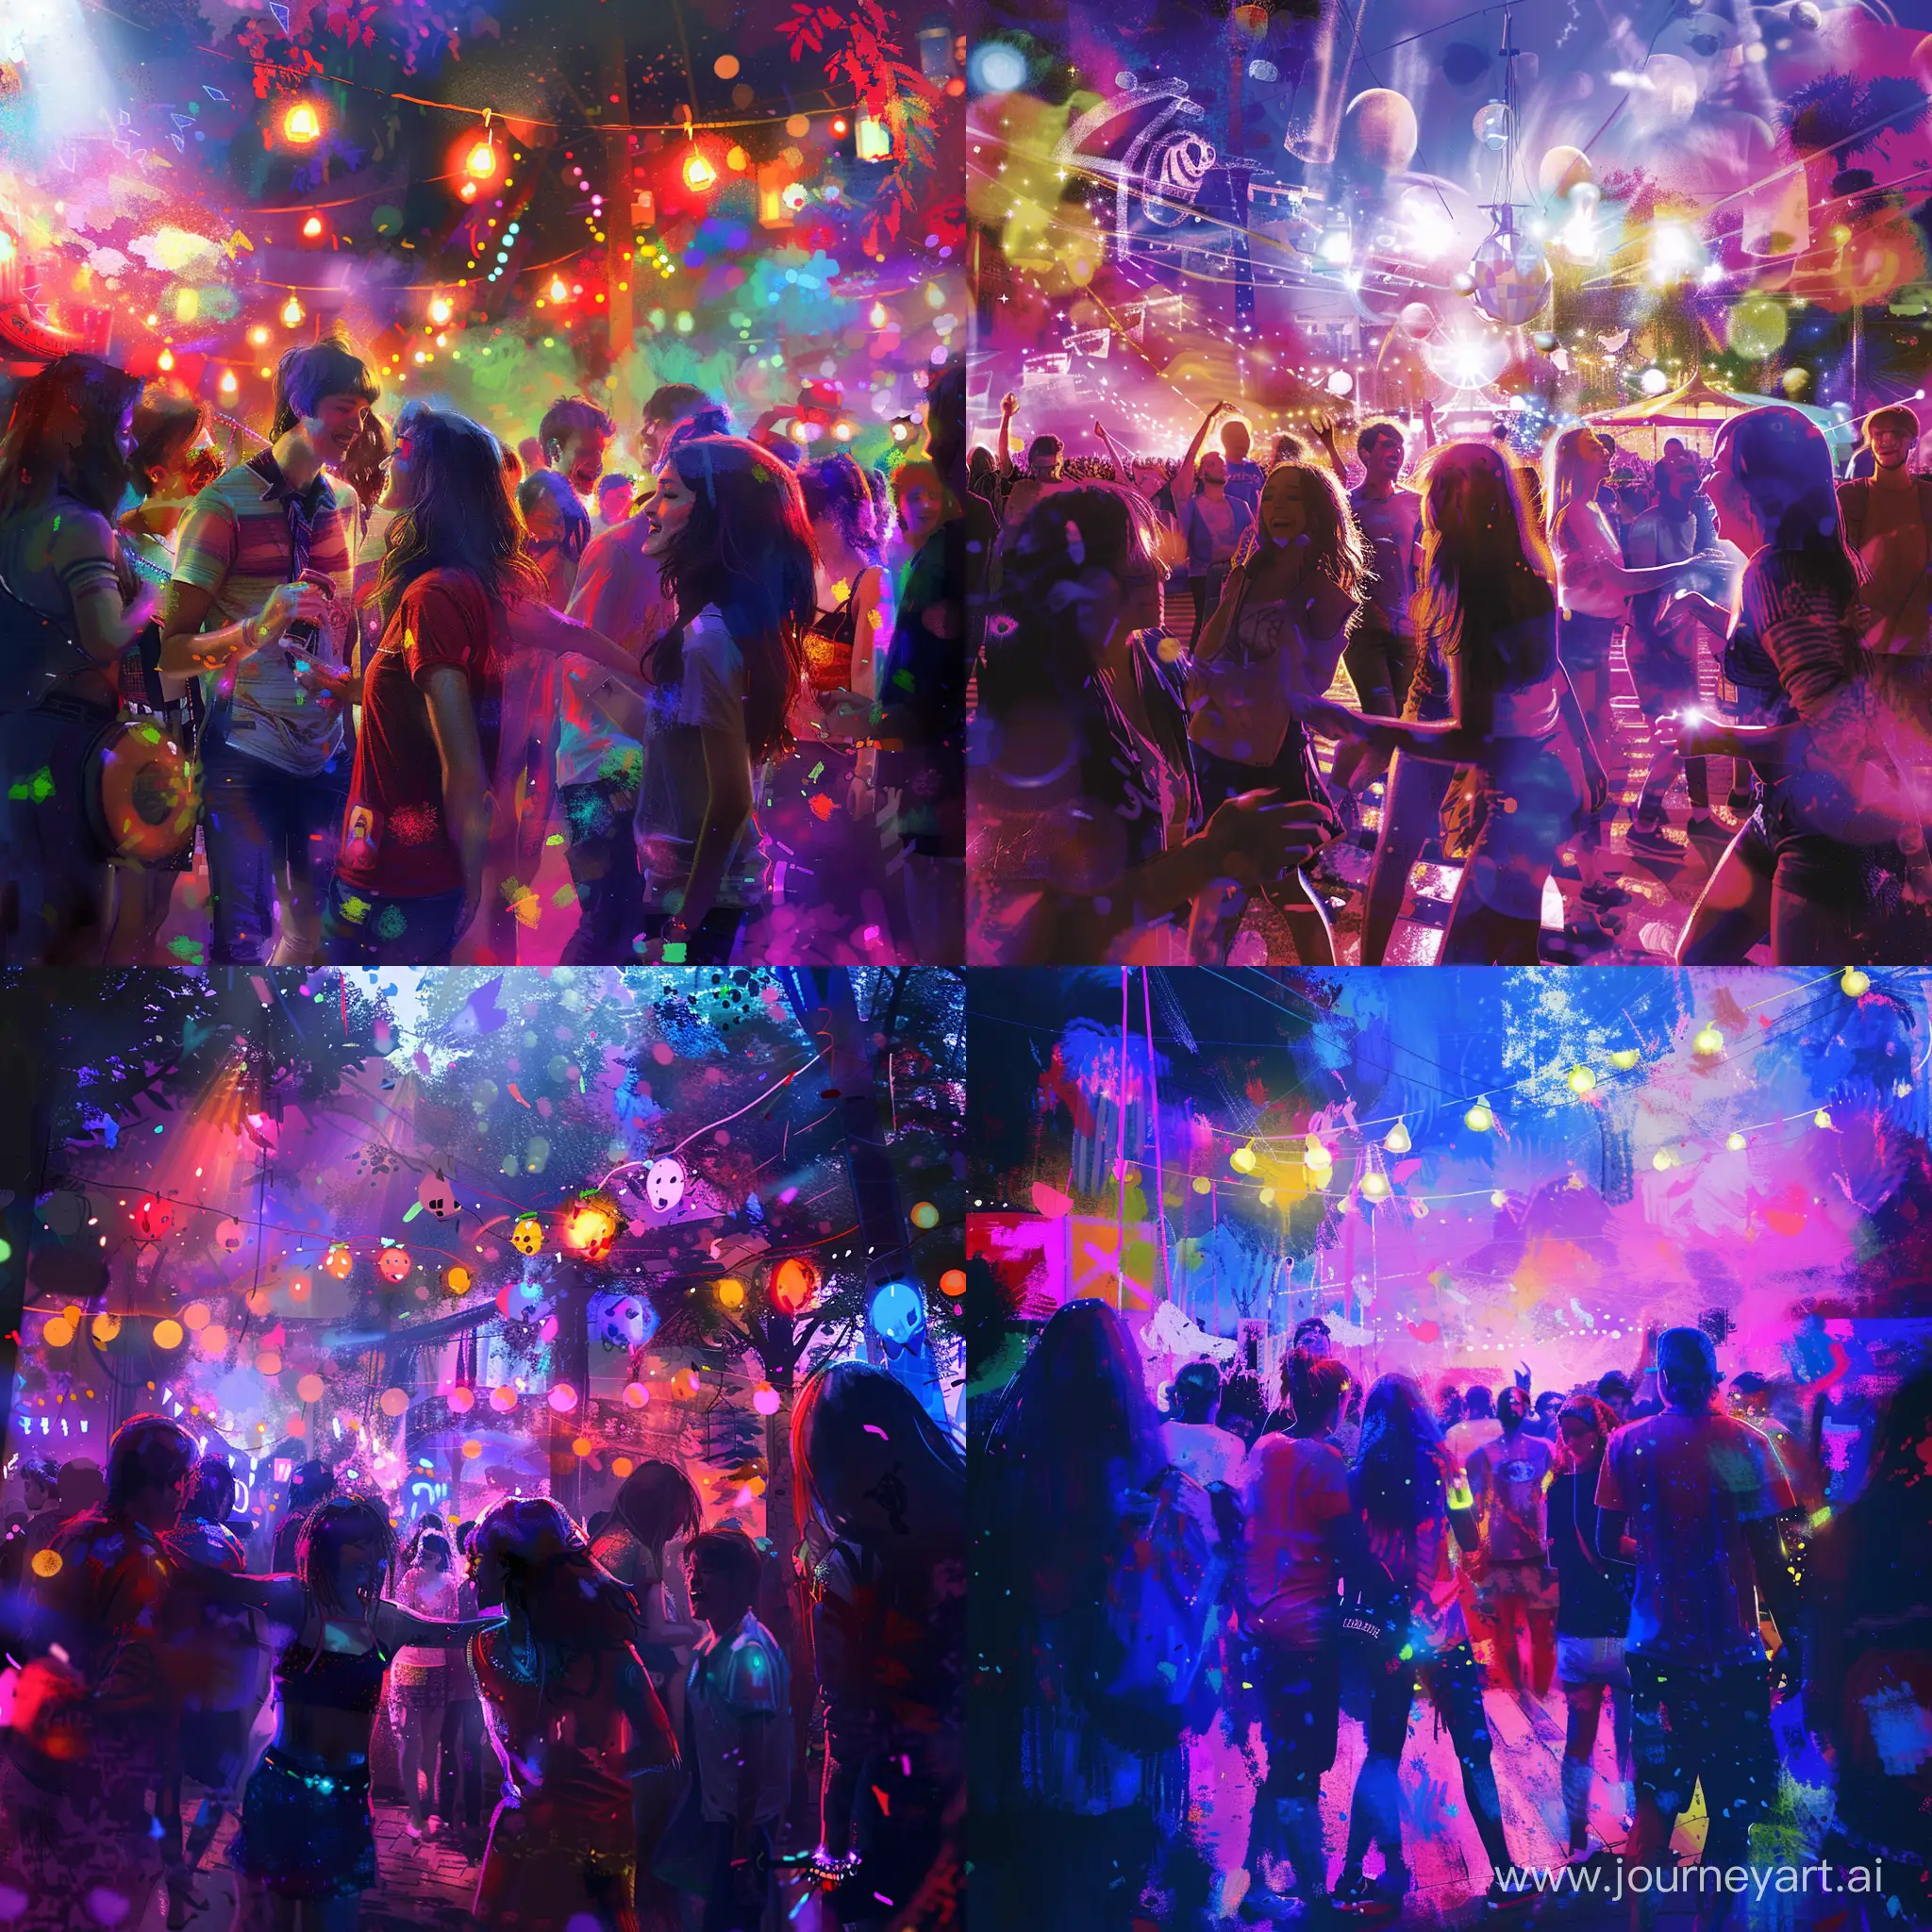 Energetic-Youth-Celebrating-at-Vibrant-Outdoor-Festival